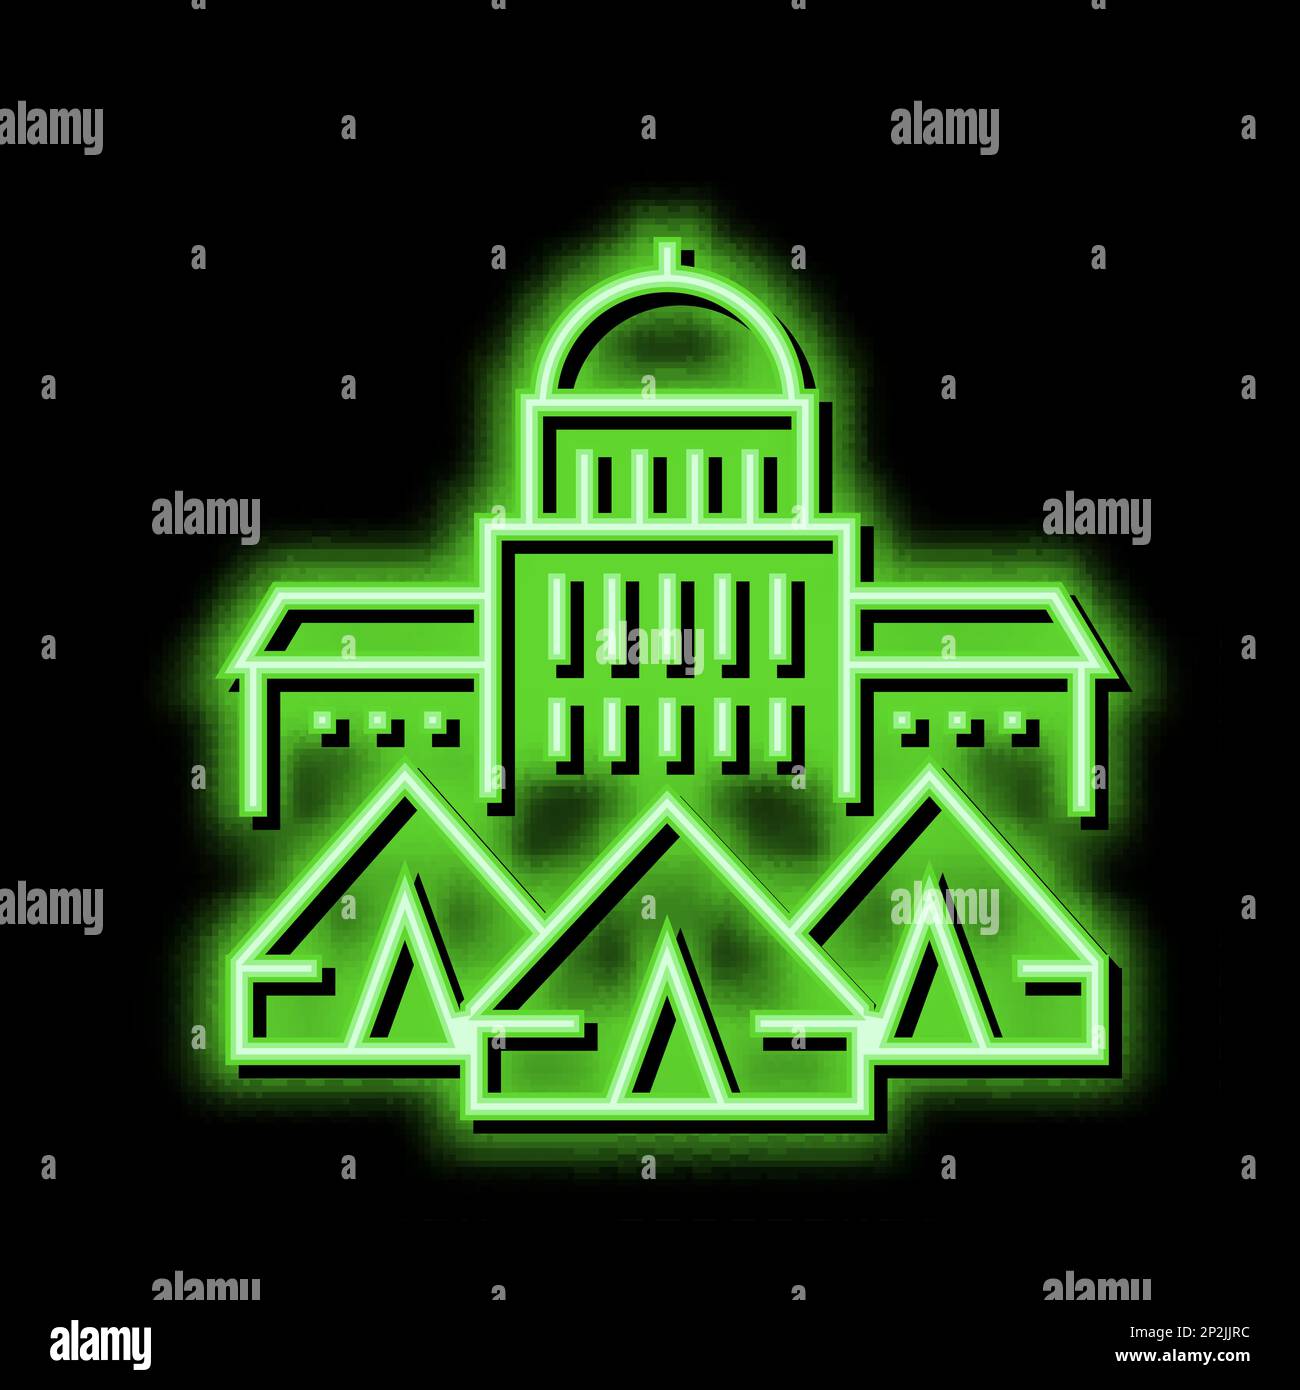 government building refugee campground neon glow icon illustration Stock Vector